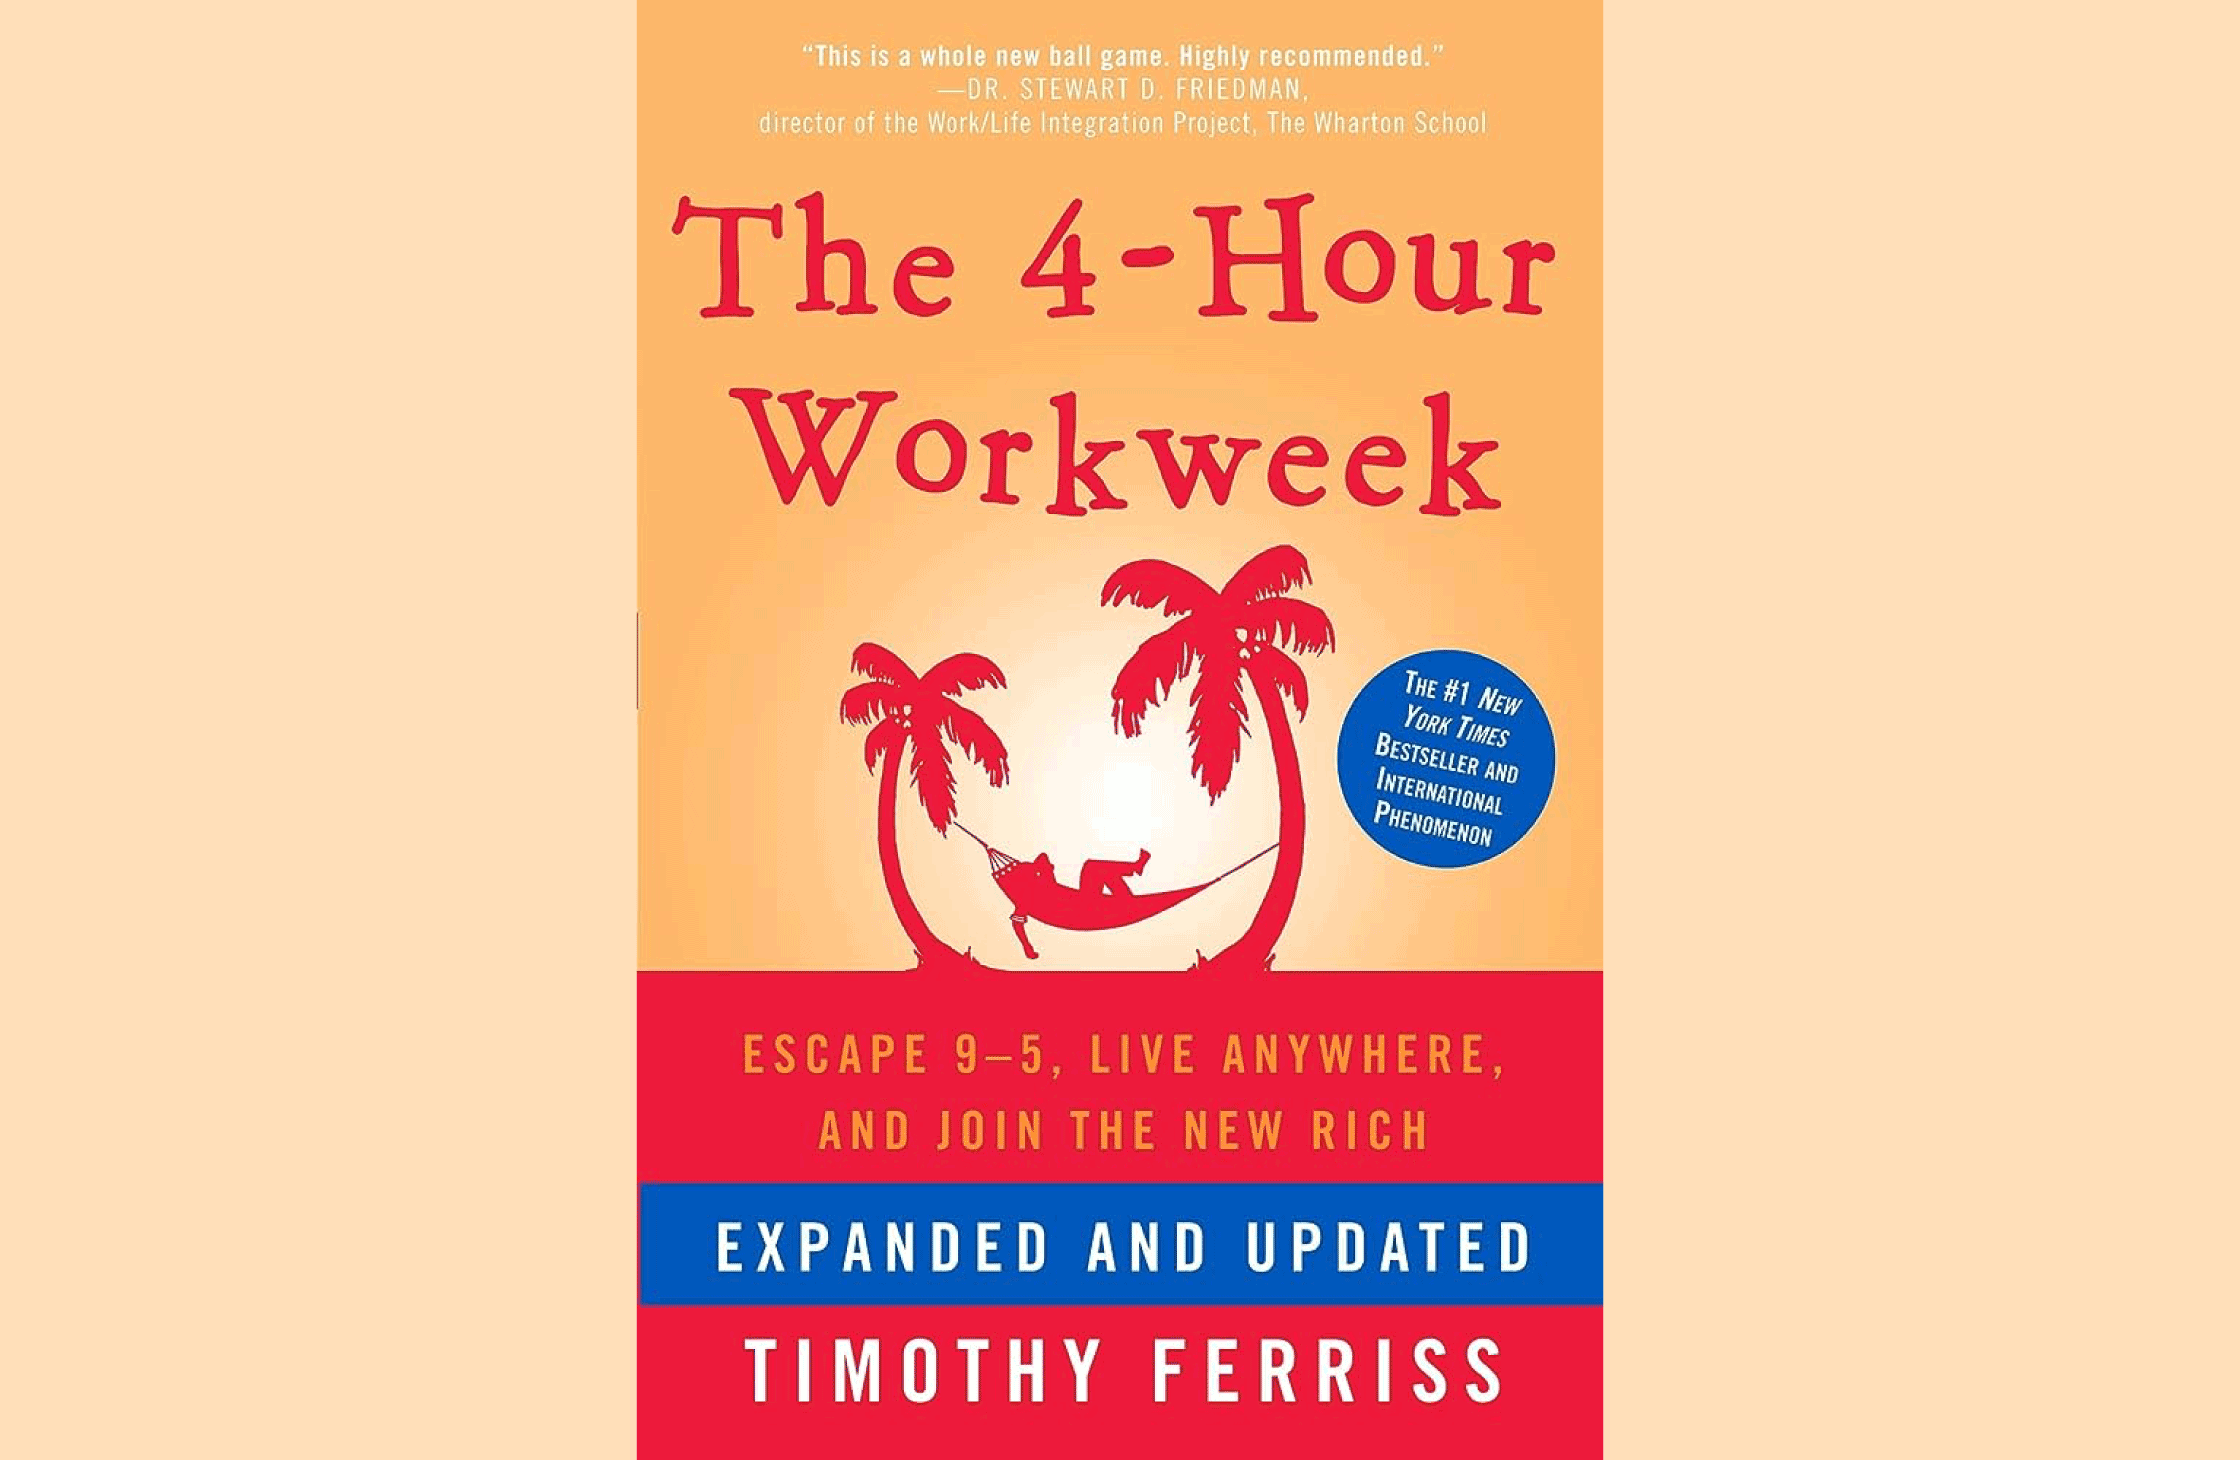 Summary: The 4-Hour Workweek: Escape 9-5, Live Anywhere, and Join the New Rich: Timothy Ferriss